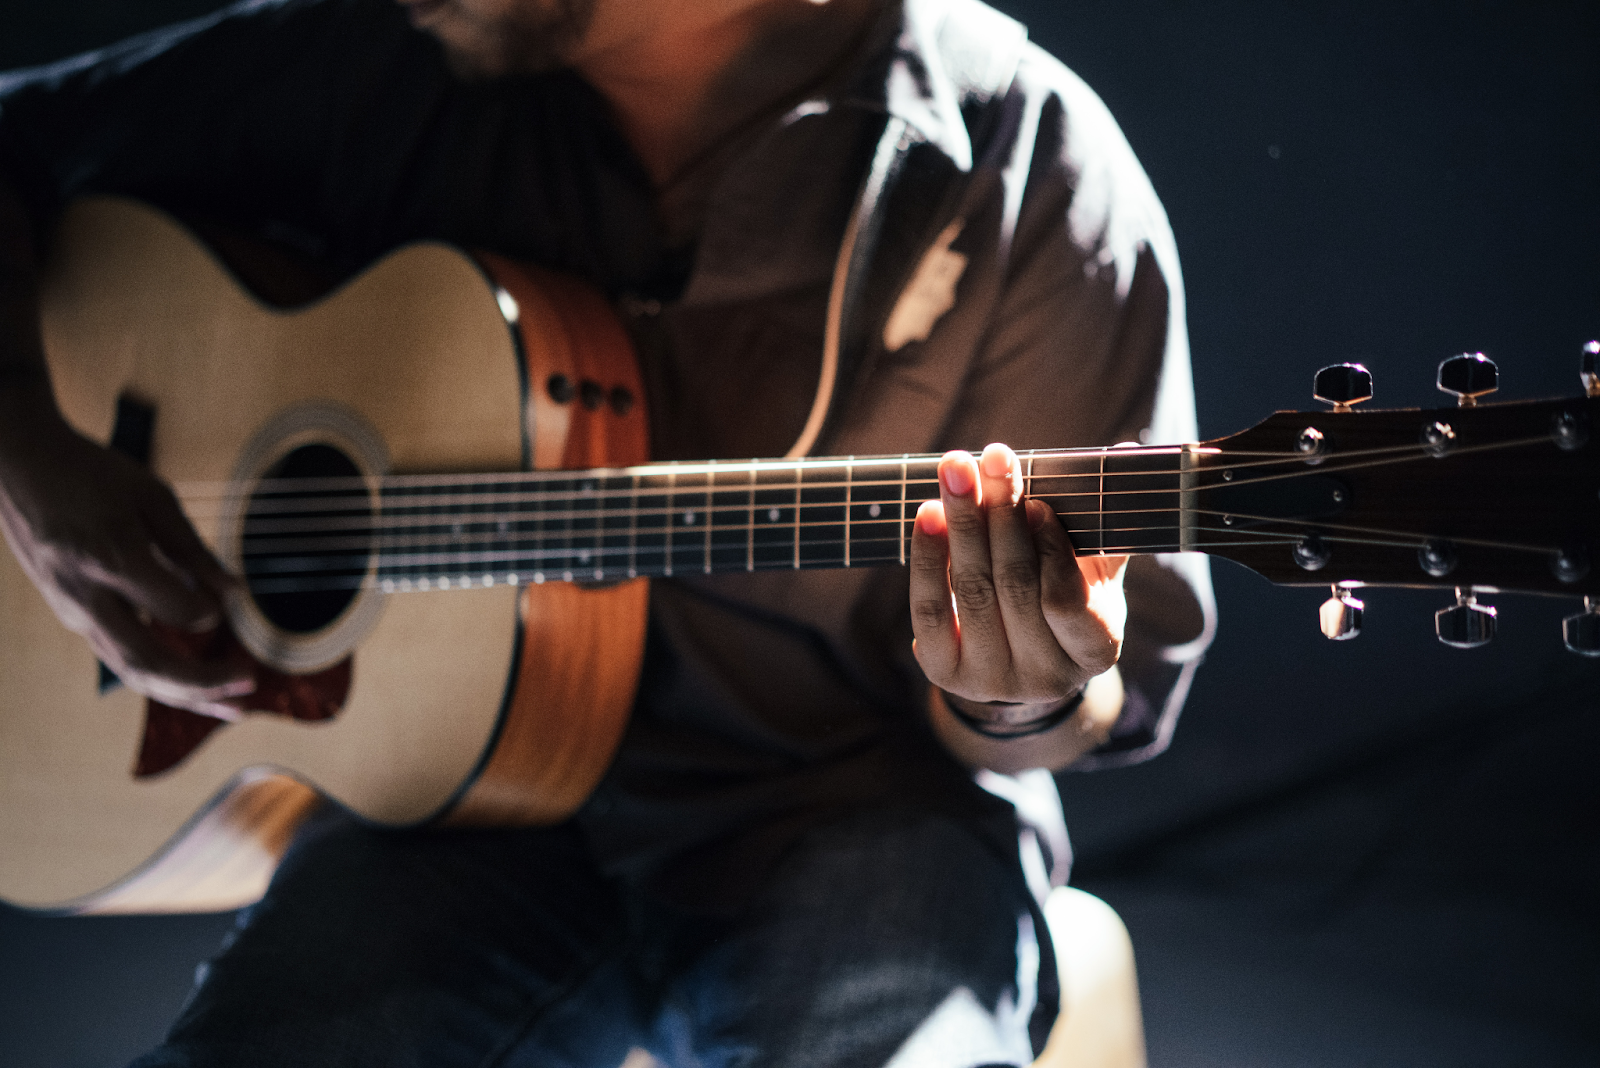 Man holding an acoustic electric guitar